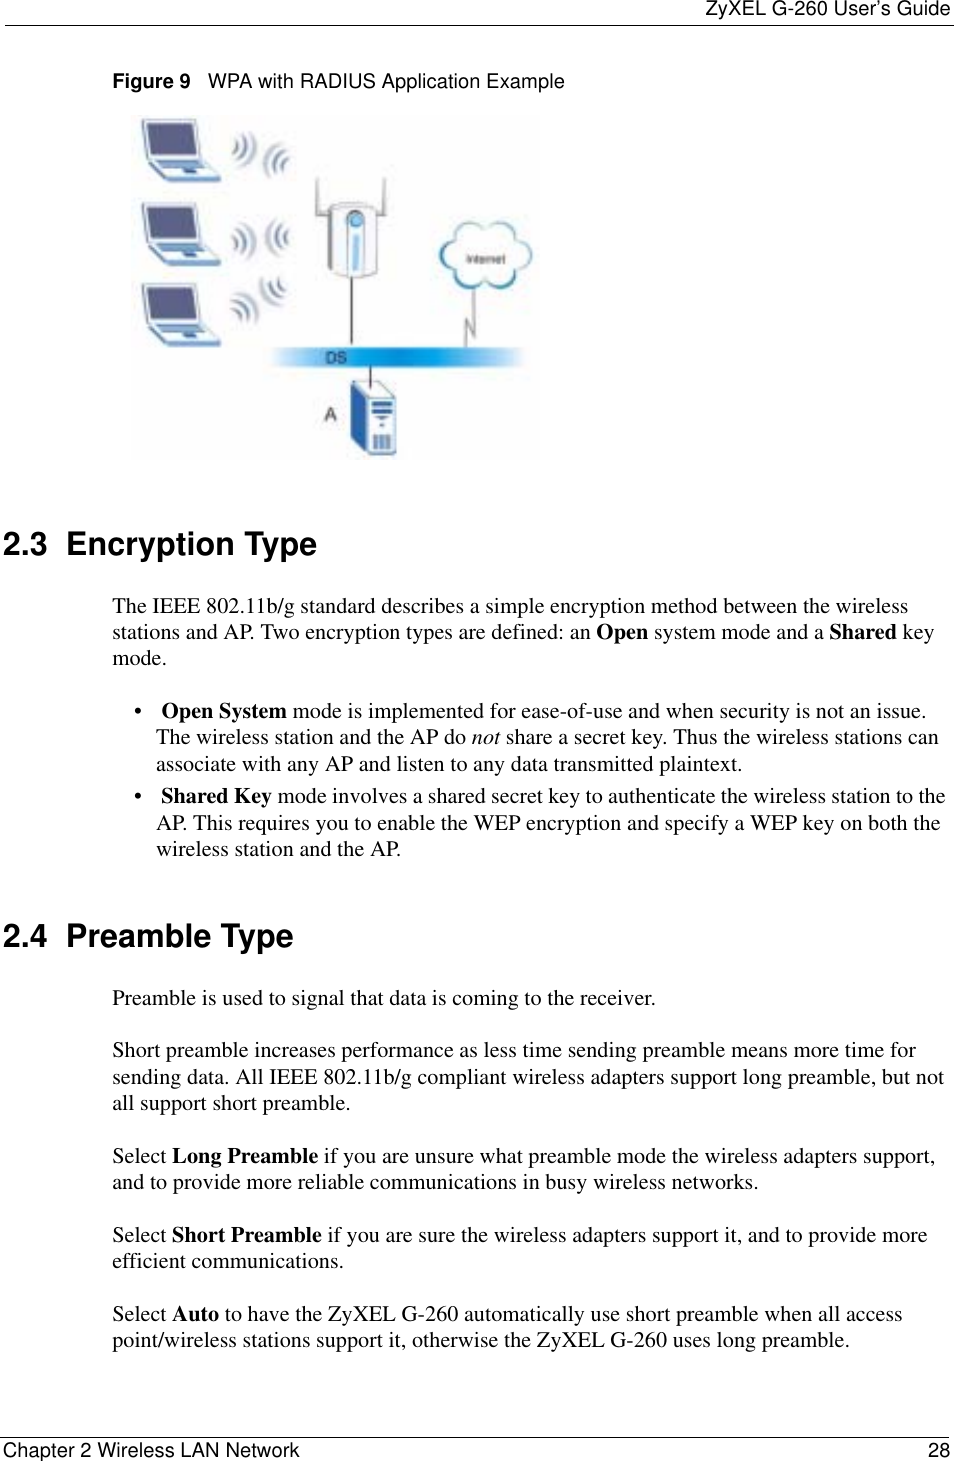 ZyXEL G-260 User’s GuideChapter 2 Wireless LAN Network 28Figure 9   WPA with RADIUS Application Example2.3  Encryption TypeThe IEEE 802.11b/g standard describes a simple encryption method between the wireless stations and AP. Two encryption types are defined: an Open system mode and a Shared key mode.•Open System mode is implemented for ease-of-use and when security is not an issue. The wireless station and the AP do not share a secret key. Thus the wireless stations can associate with any AP and listen to any data transmitted plaintext.•Shared Key mode involves a shared secret key to authenticate the wireless station to the AP. This requires you to enable the WEP encryption and specify a WEP key on both the wireless station and the AP. 2.4  Preamble TypePreamble is used to signal that data is coming to the receiver.  Short preamble increases performance as less time sending preamble means more time for sending data. All IEEE 802.11b/g compliant wireless adapters support long preamble, but not all support short preamble. Select Long Preamble if you are unsure what preamble mode the wireless adapters support, and to provide more reliable communications in busy wireless networks. Select Short Preamble if you are sure the wireless adapters support it, and to provide more efficient communications.Select Auto to have the ZyXEL G-260 automatically use short preamble when all access point/wireless stations support it, otherwise the ZyXEL G-260 uses long preamble.